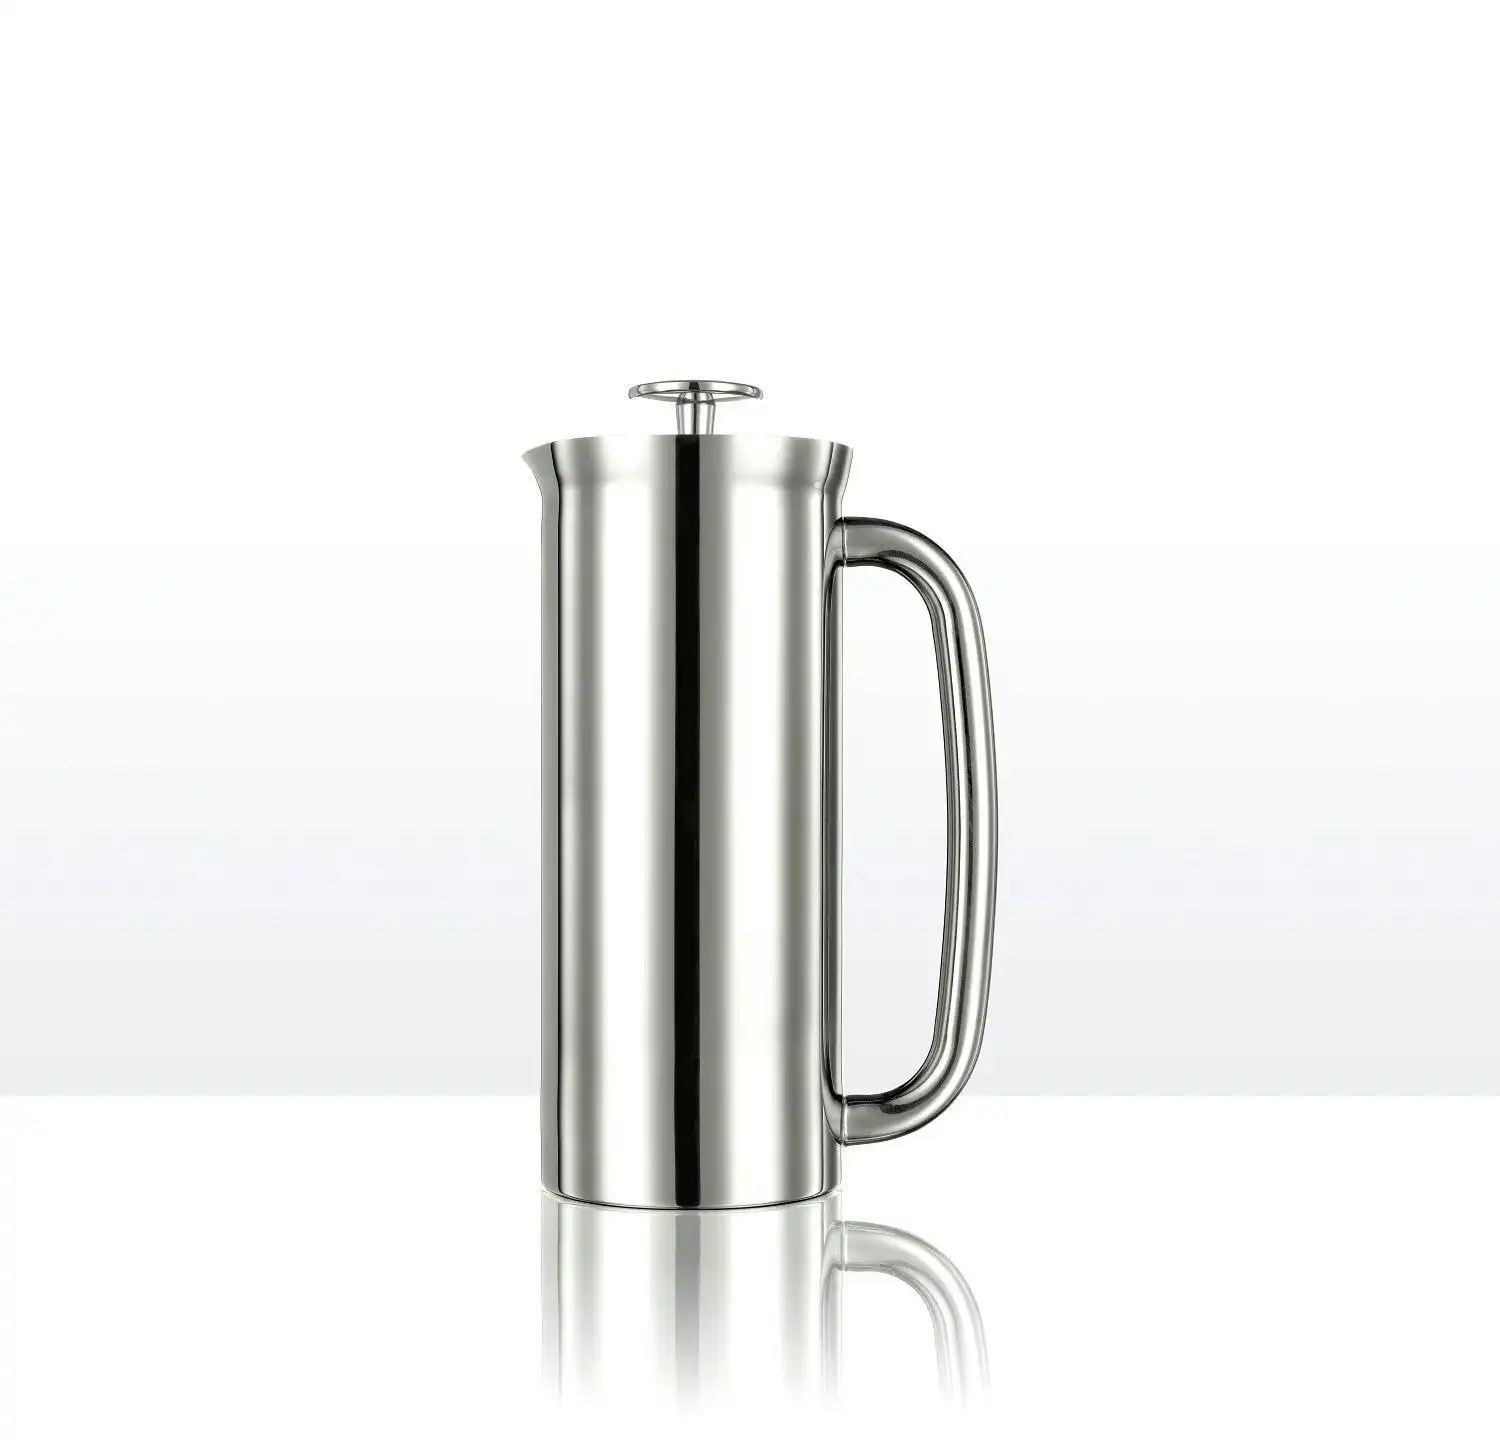 The Espro Press   6 Cup   For Lovers Of Traditional Coffee